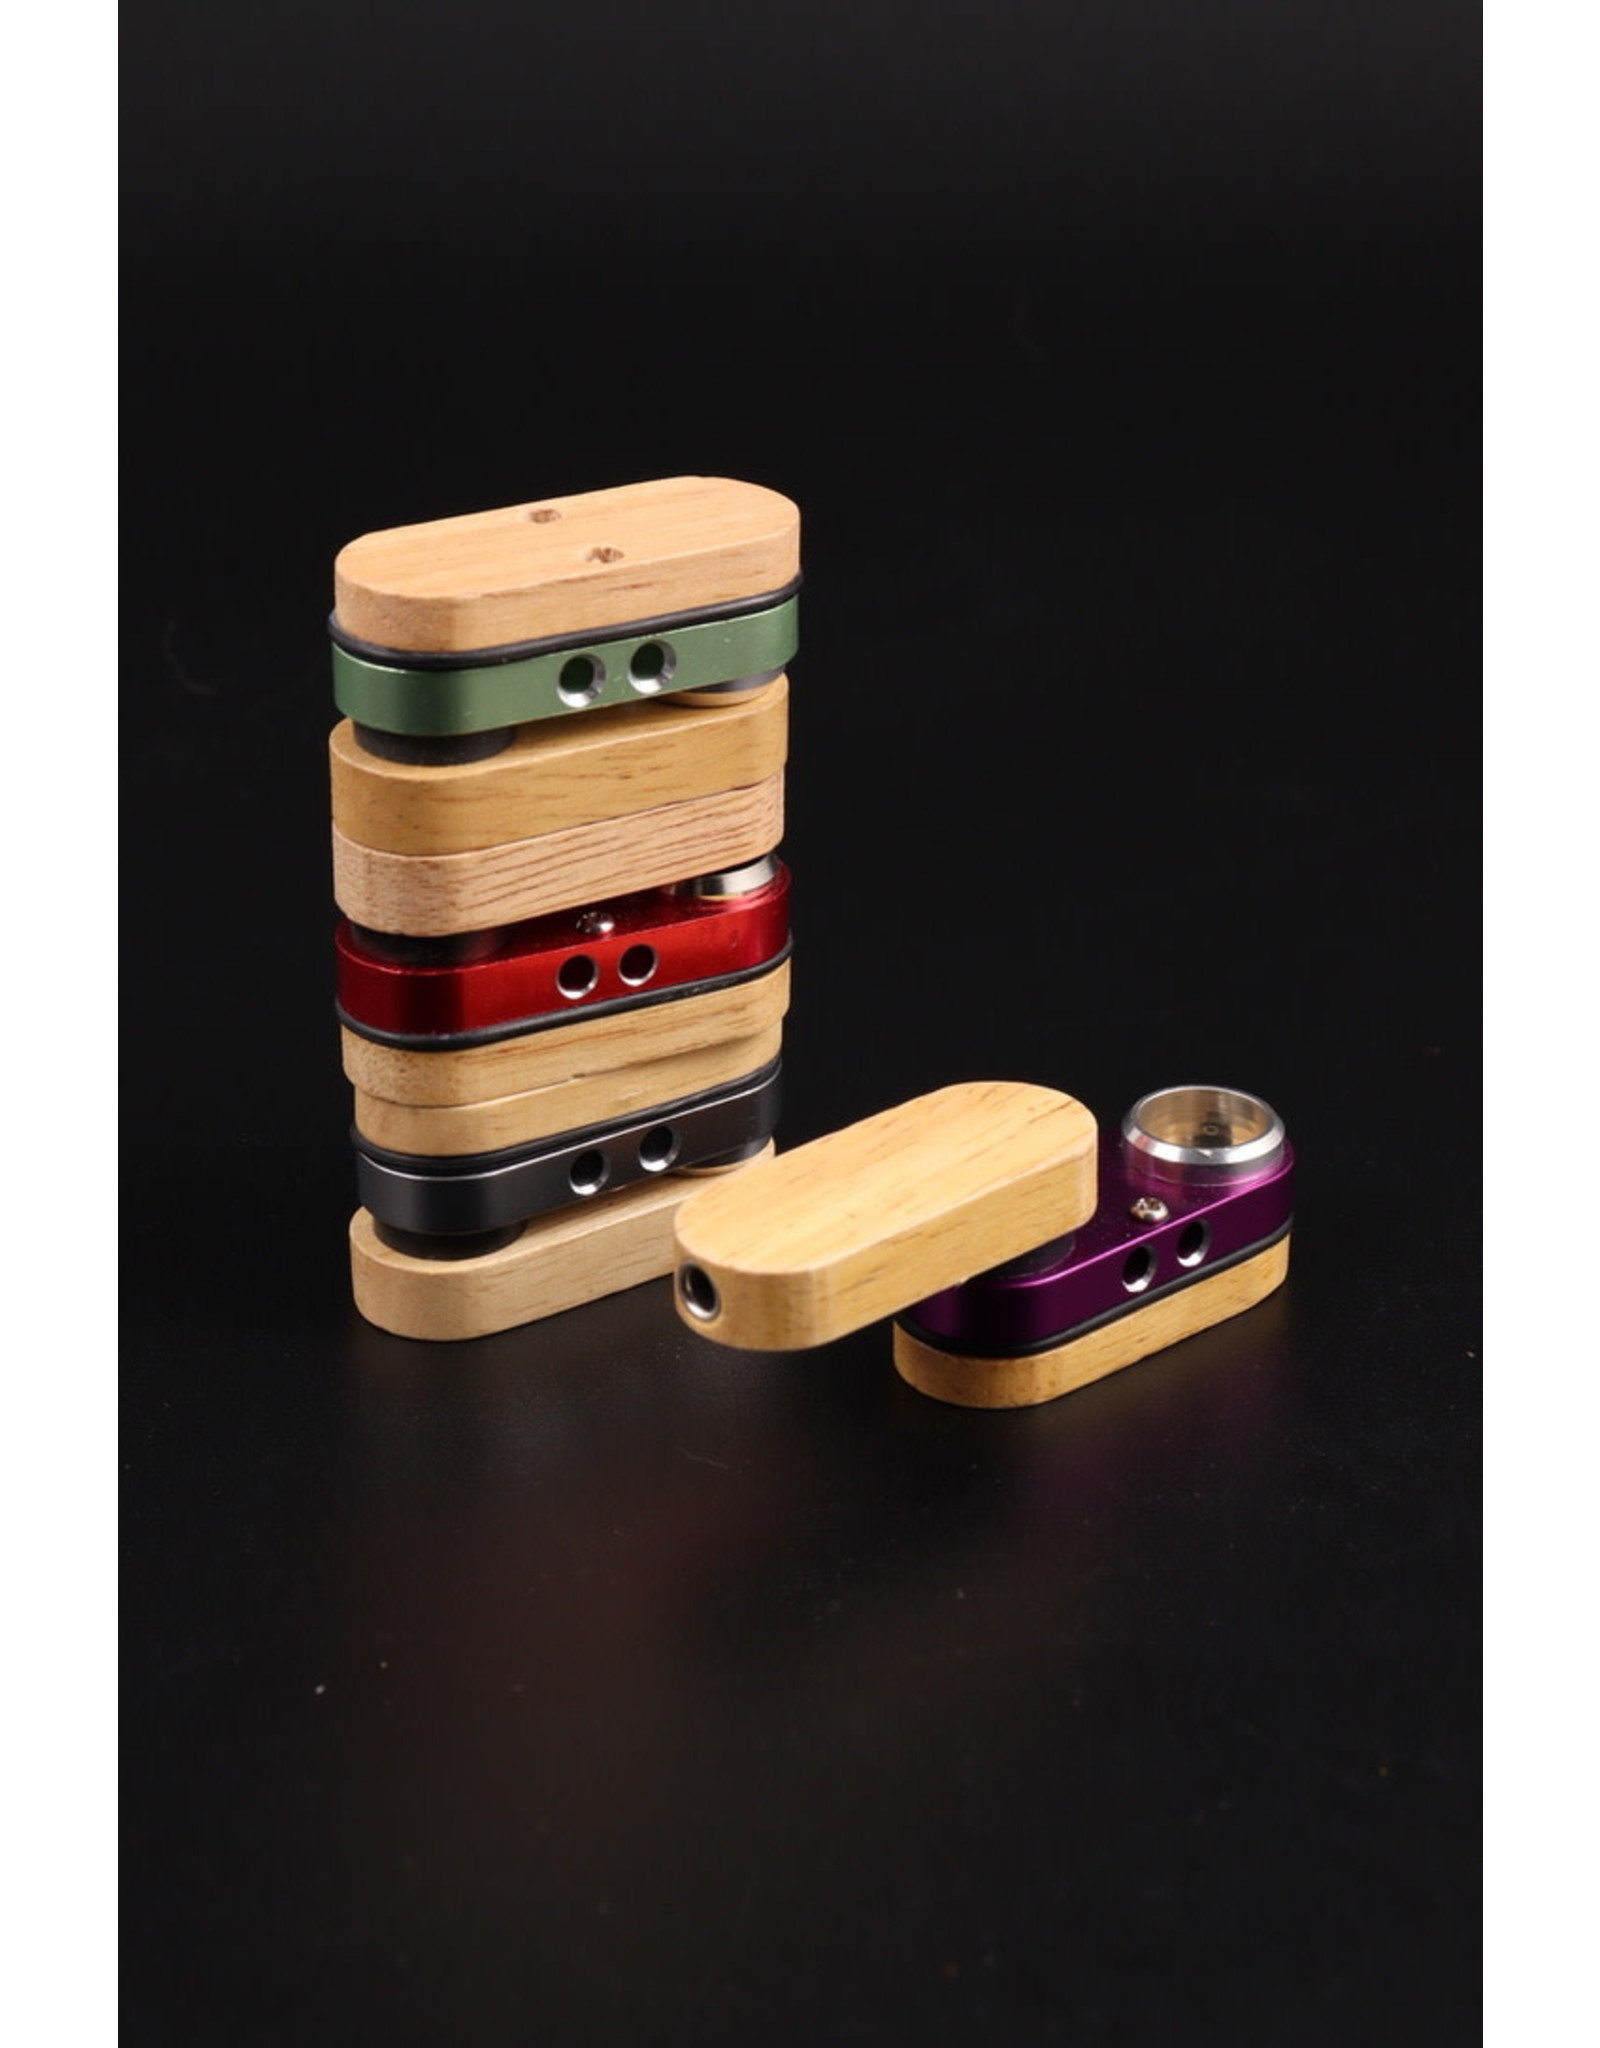 DAW Wood Wooden Pipe with Color Metal Insert